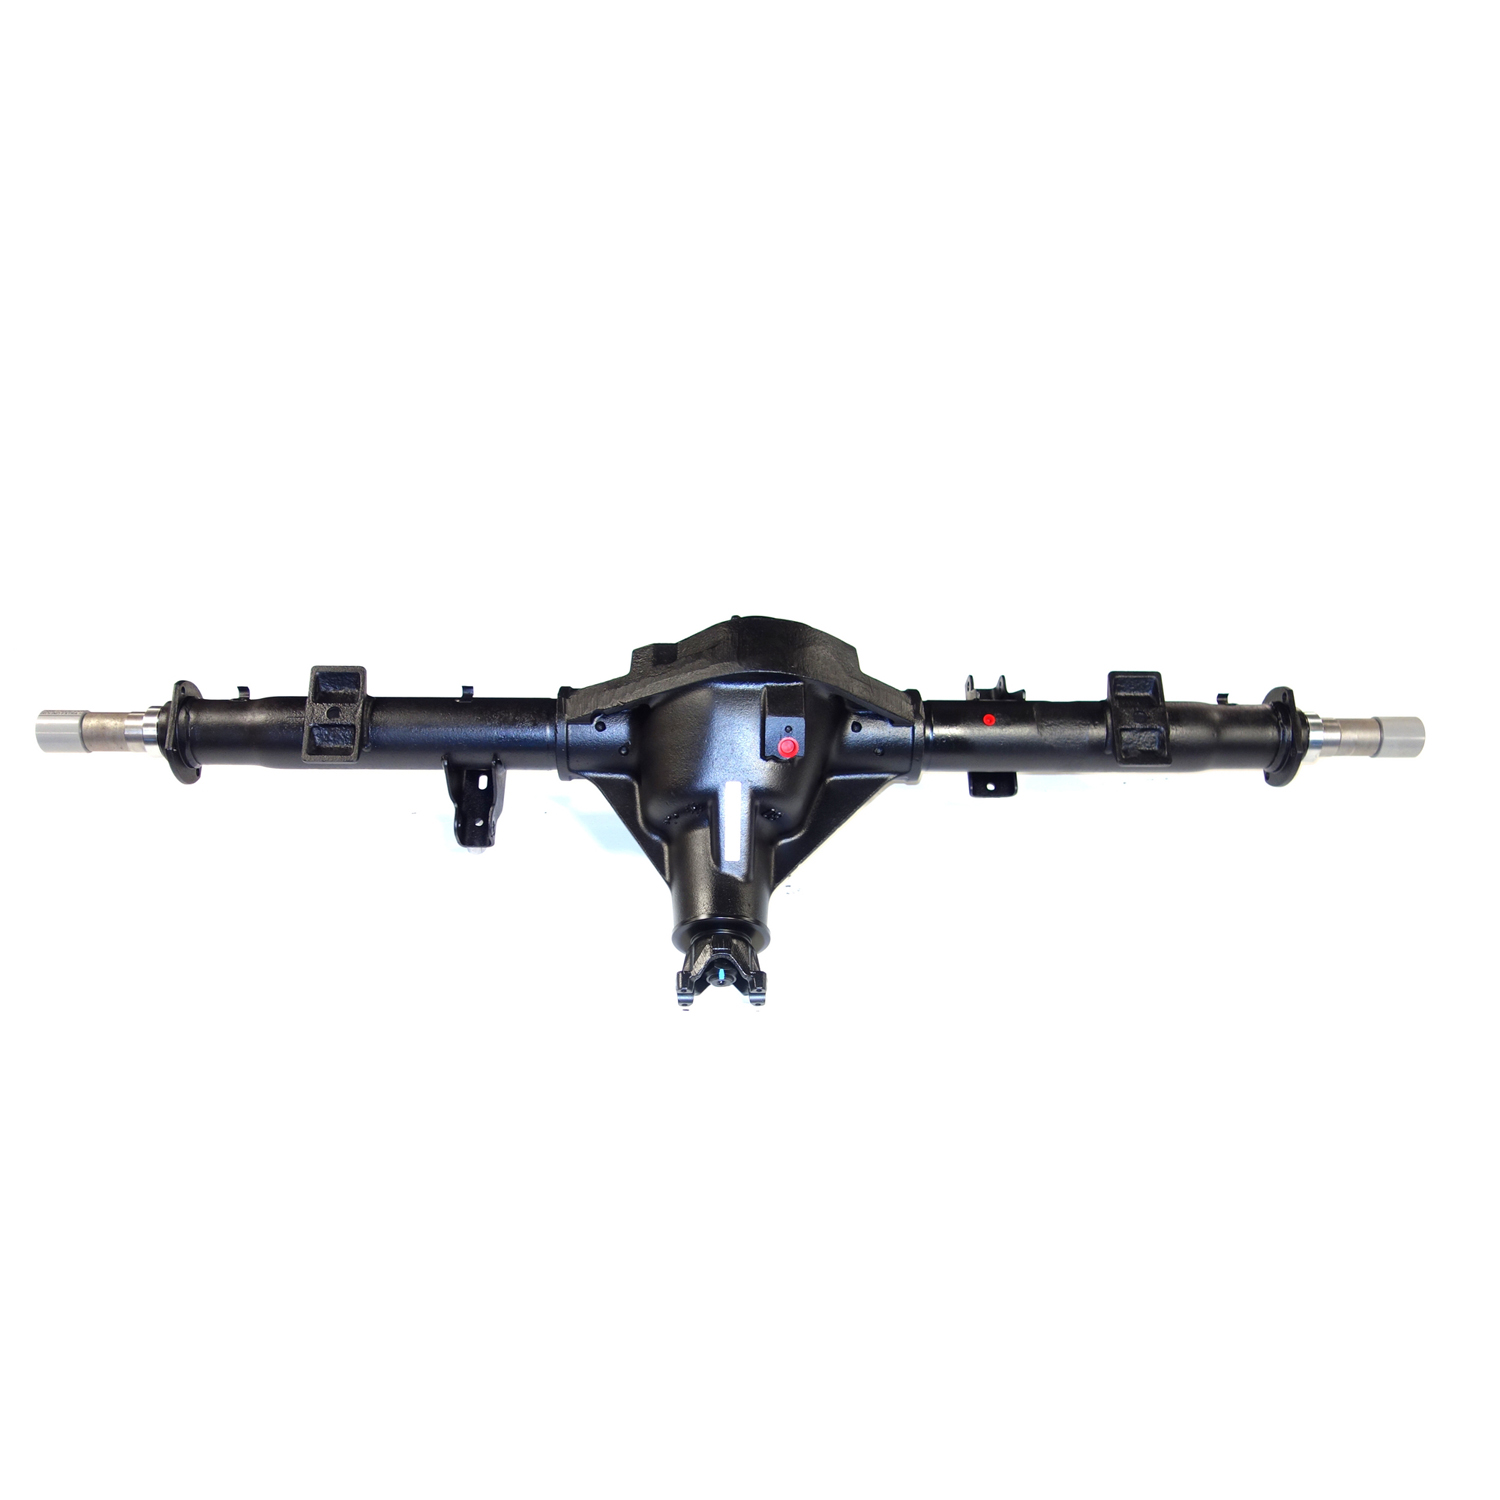 Remanufactured Complete Axle Assembly for Dana 80 96-99 Ram 2500 4x4, 4.10 Posi LSD